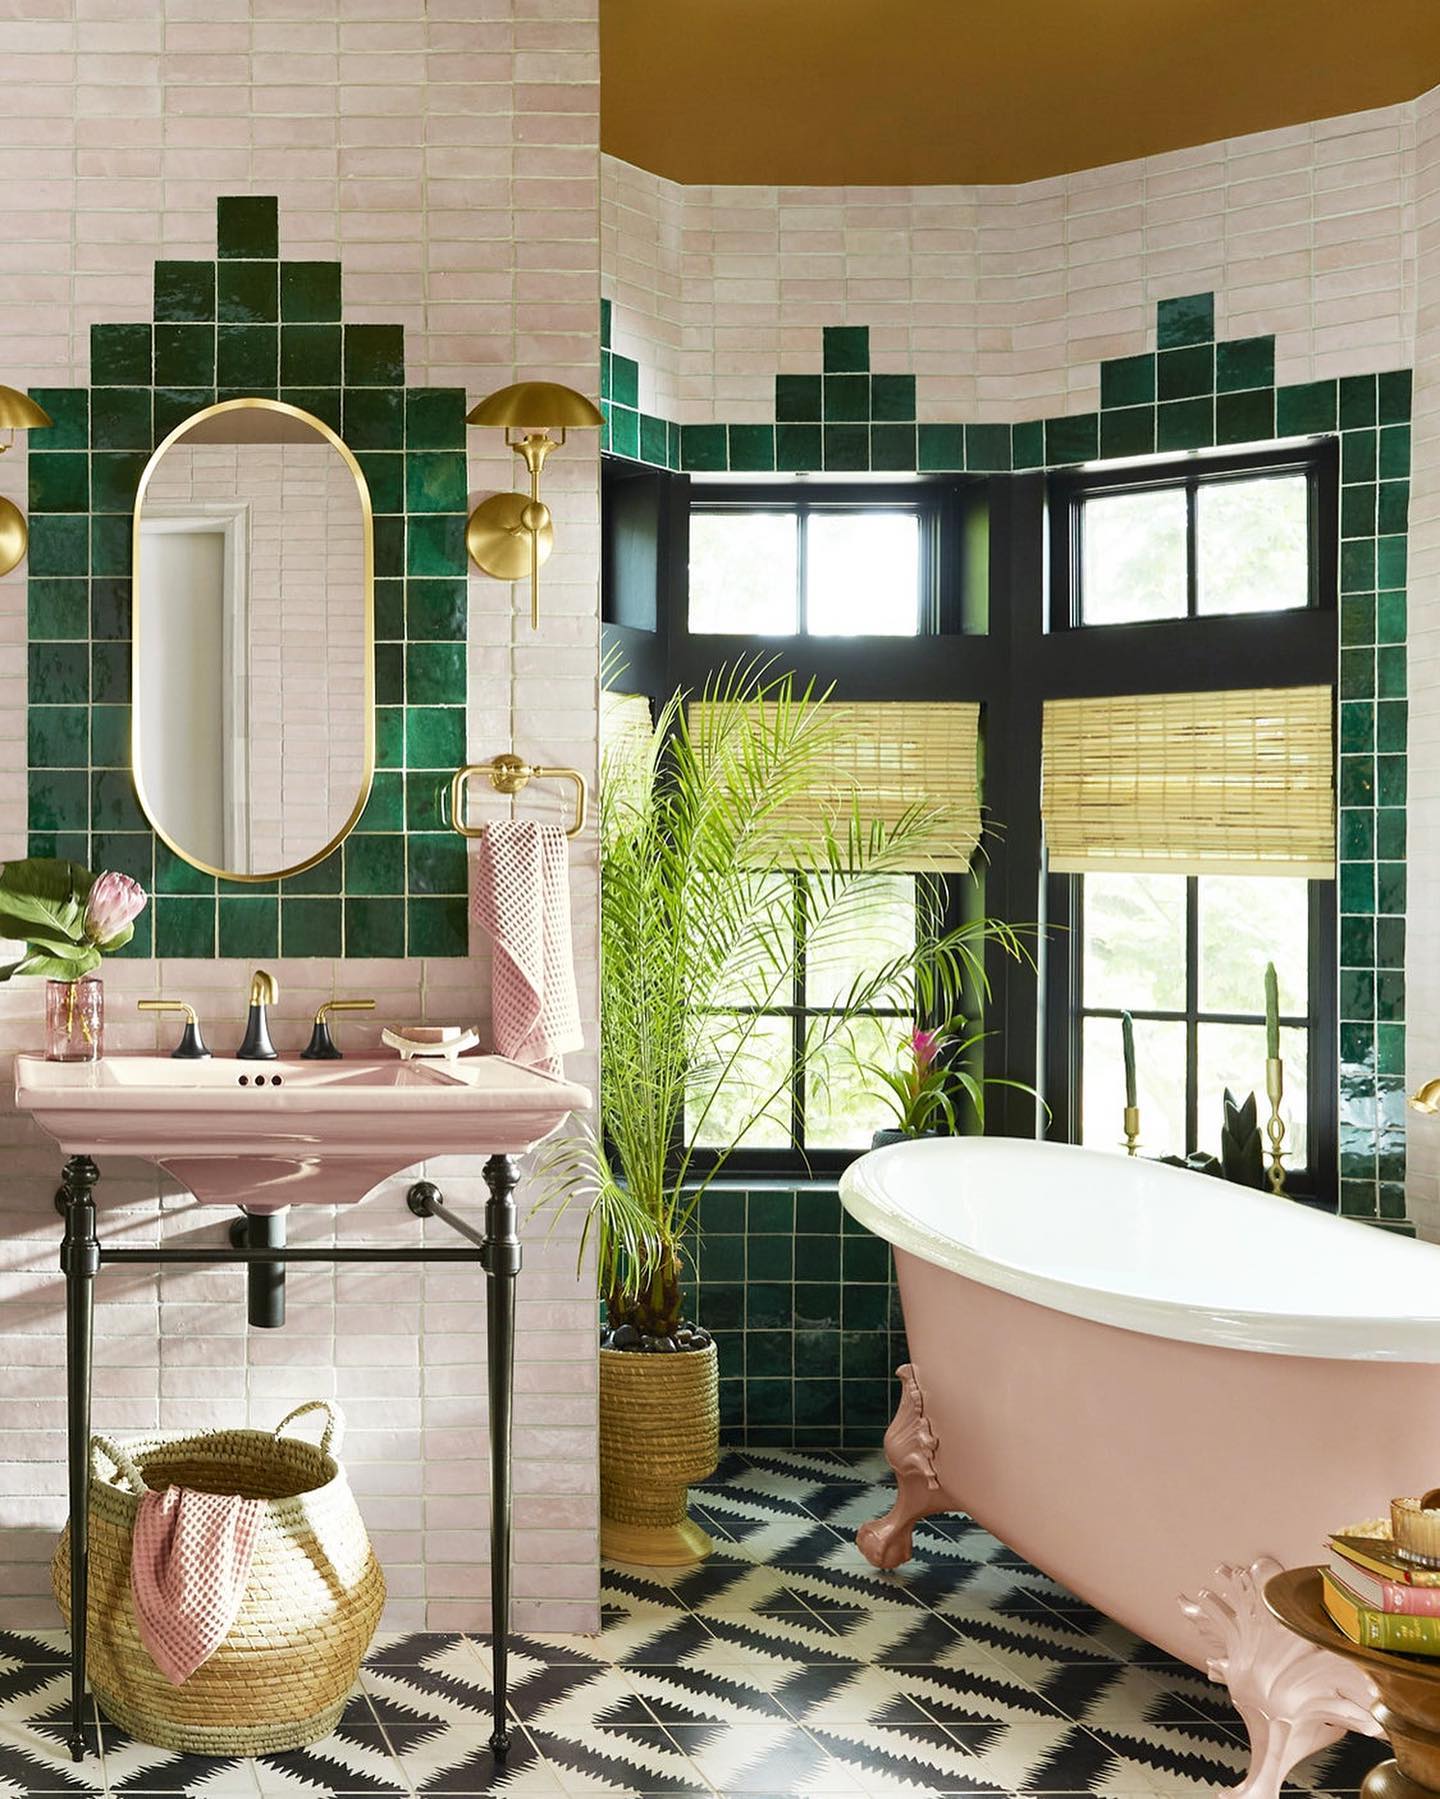 Jungalow’s Justina Blakeney Partners With Kohler To Help Launch Their Limited-Edition Heritage Colors Collection